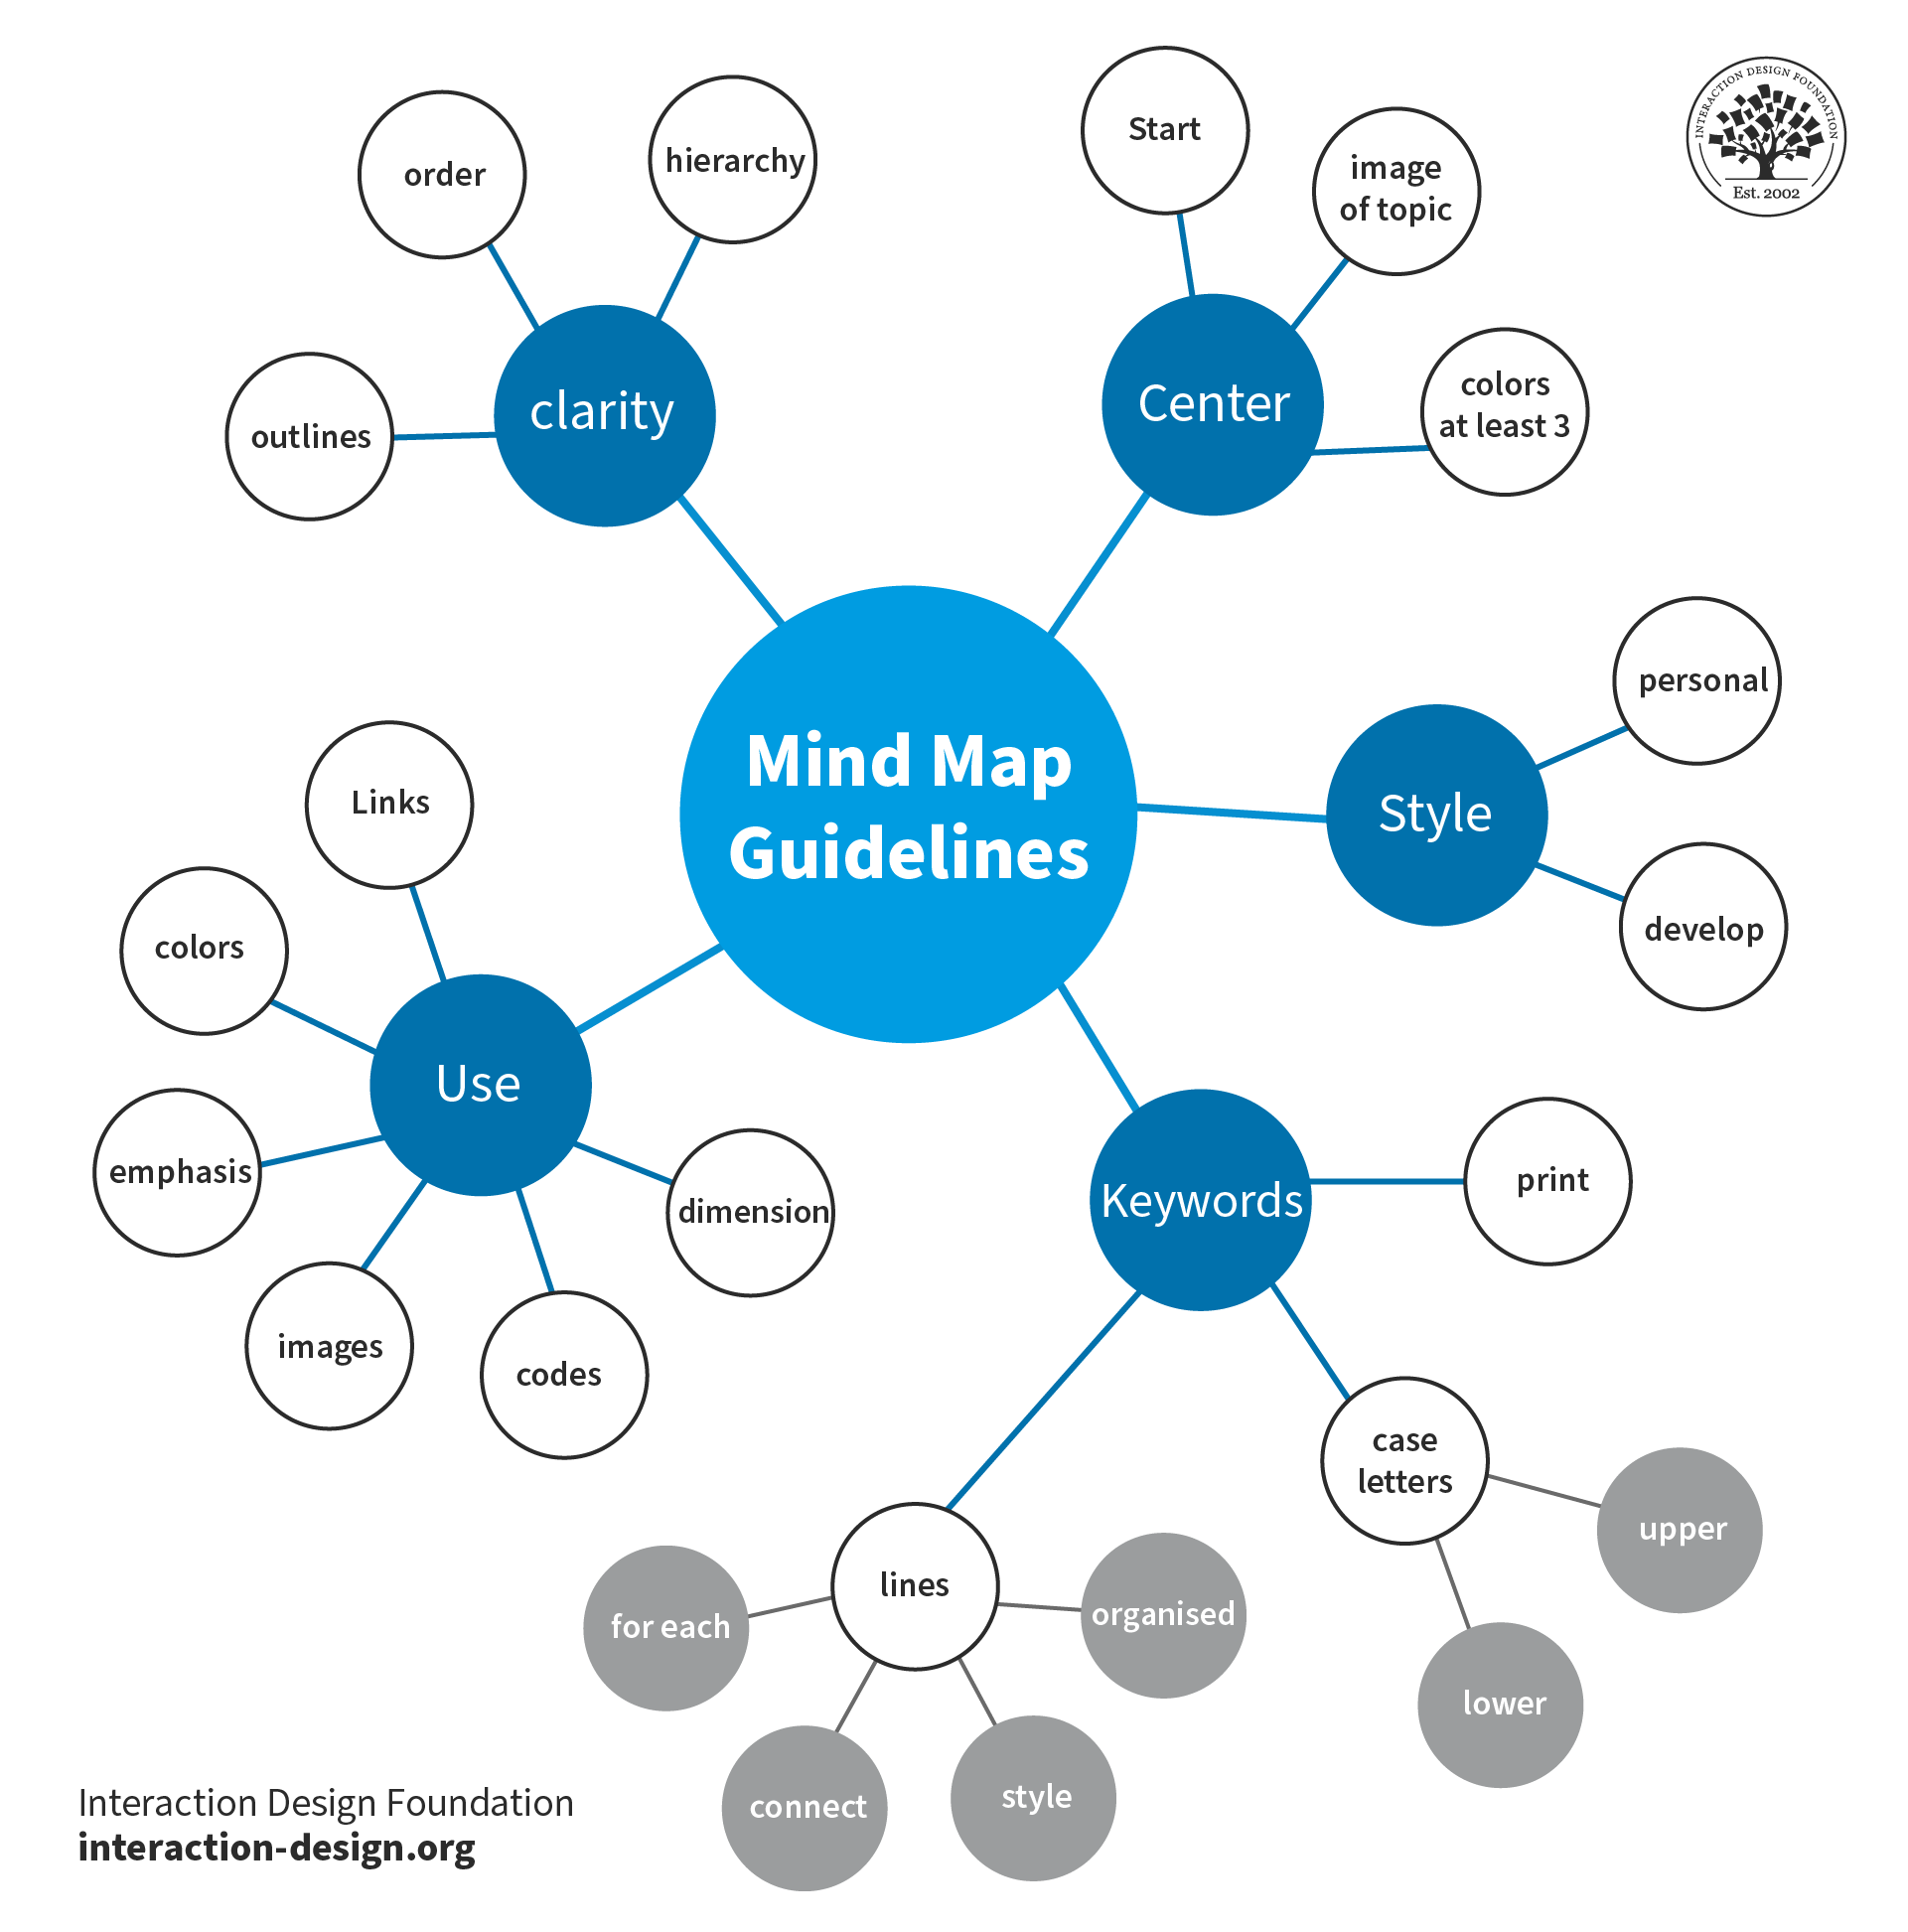 A diagram showing mind map guidelines.